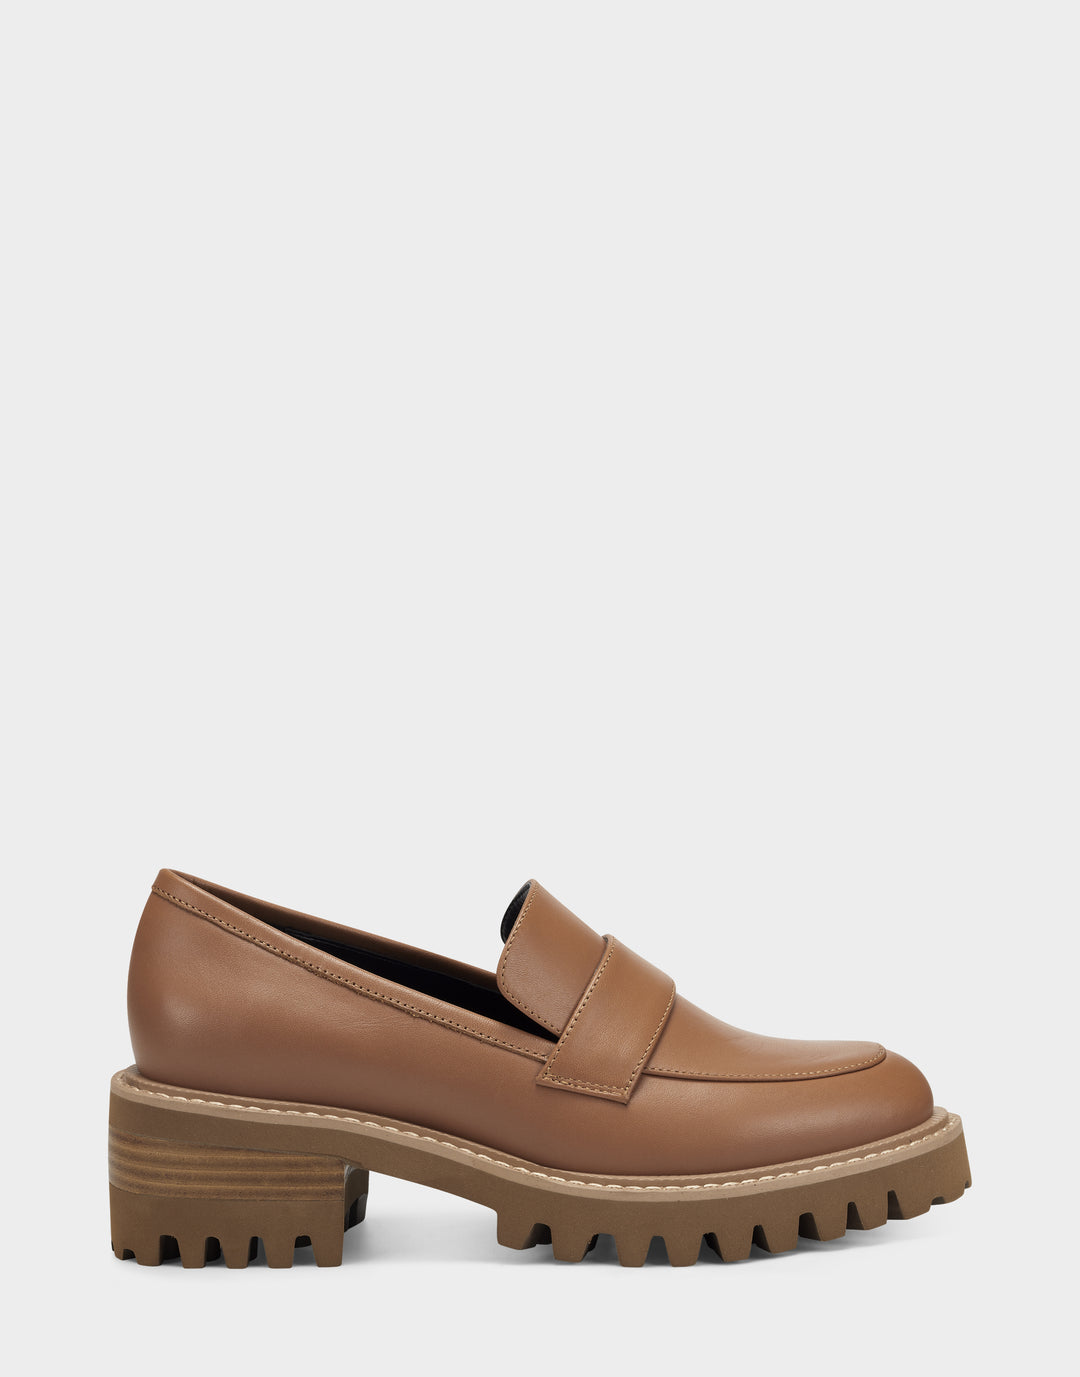 Ronnie - comfortable women's loafer in tan